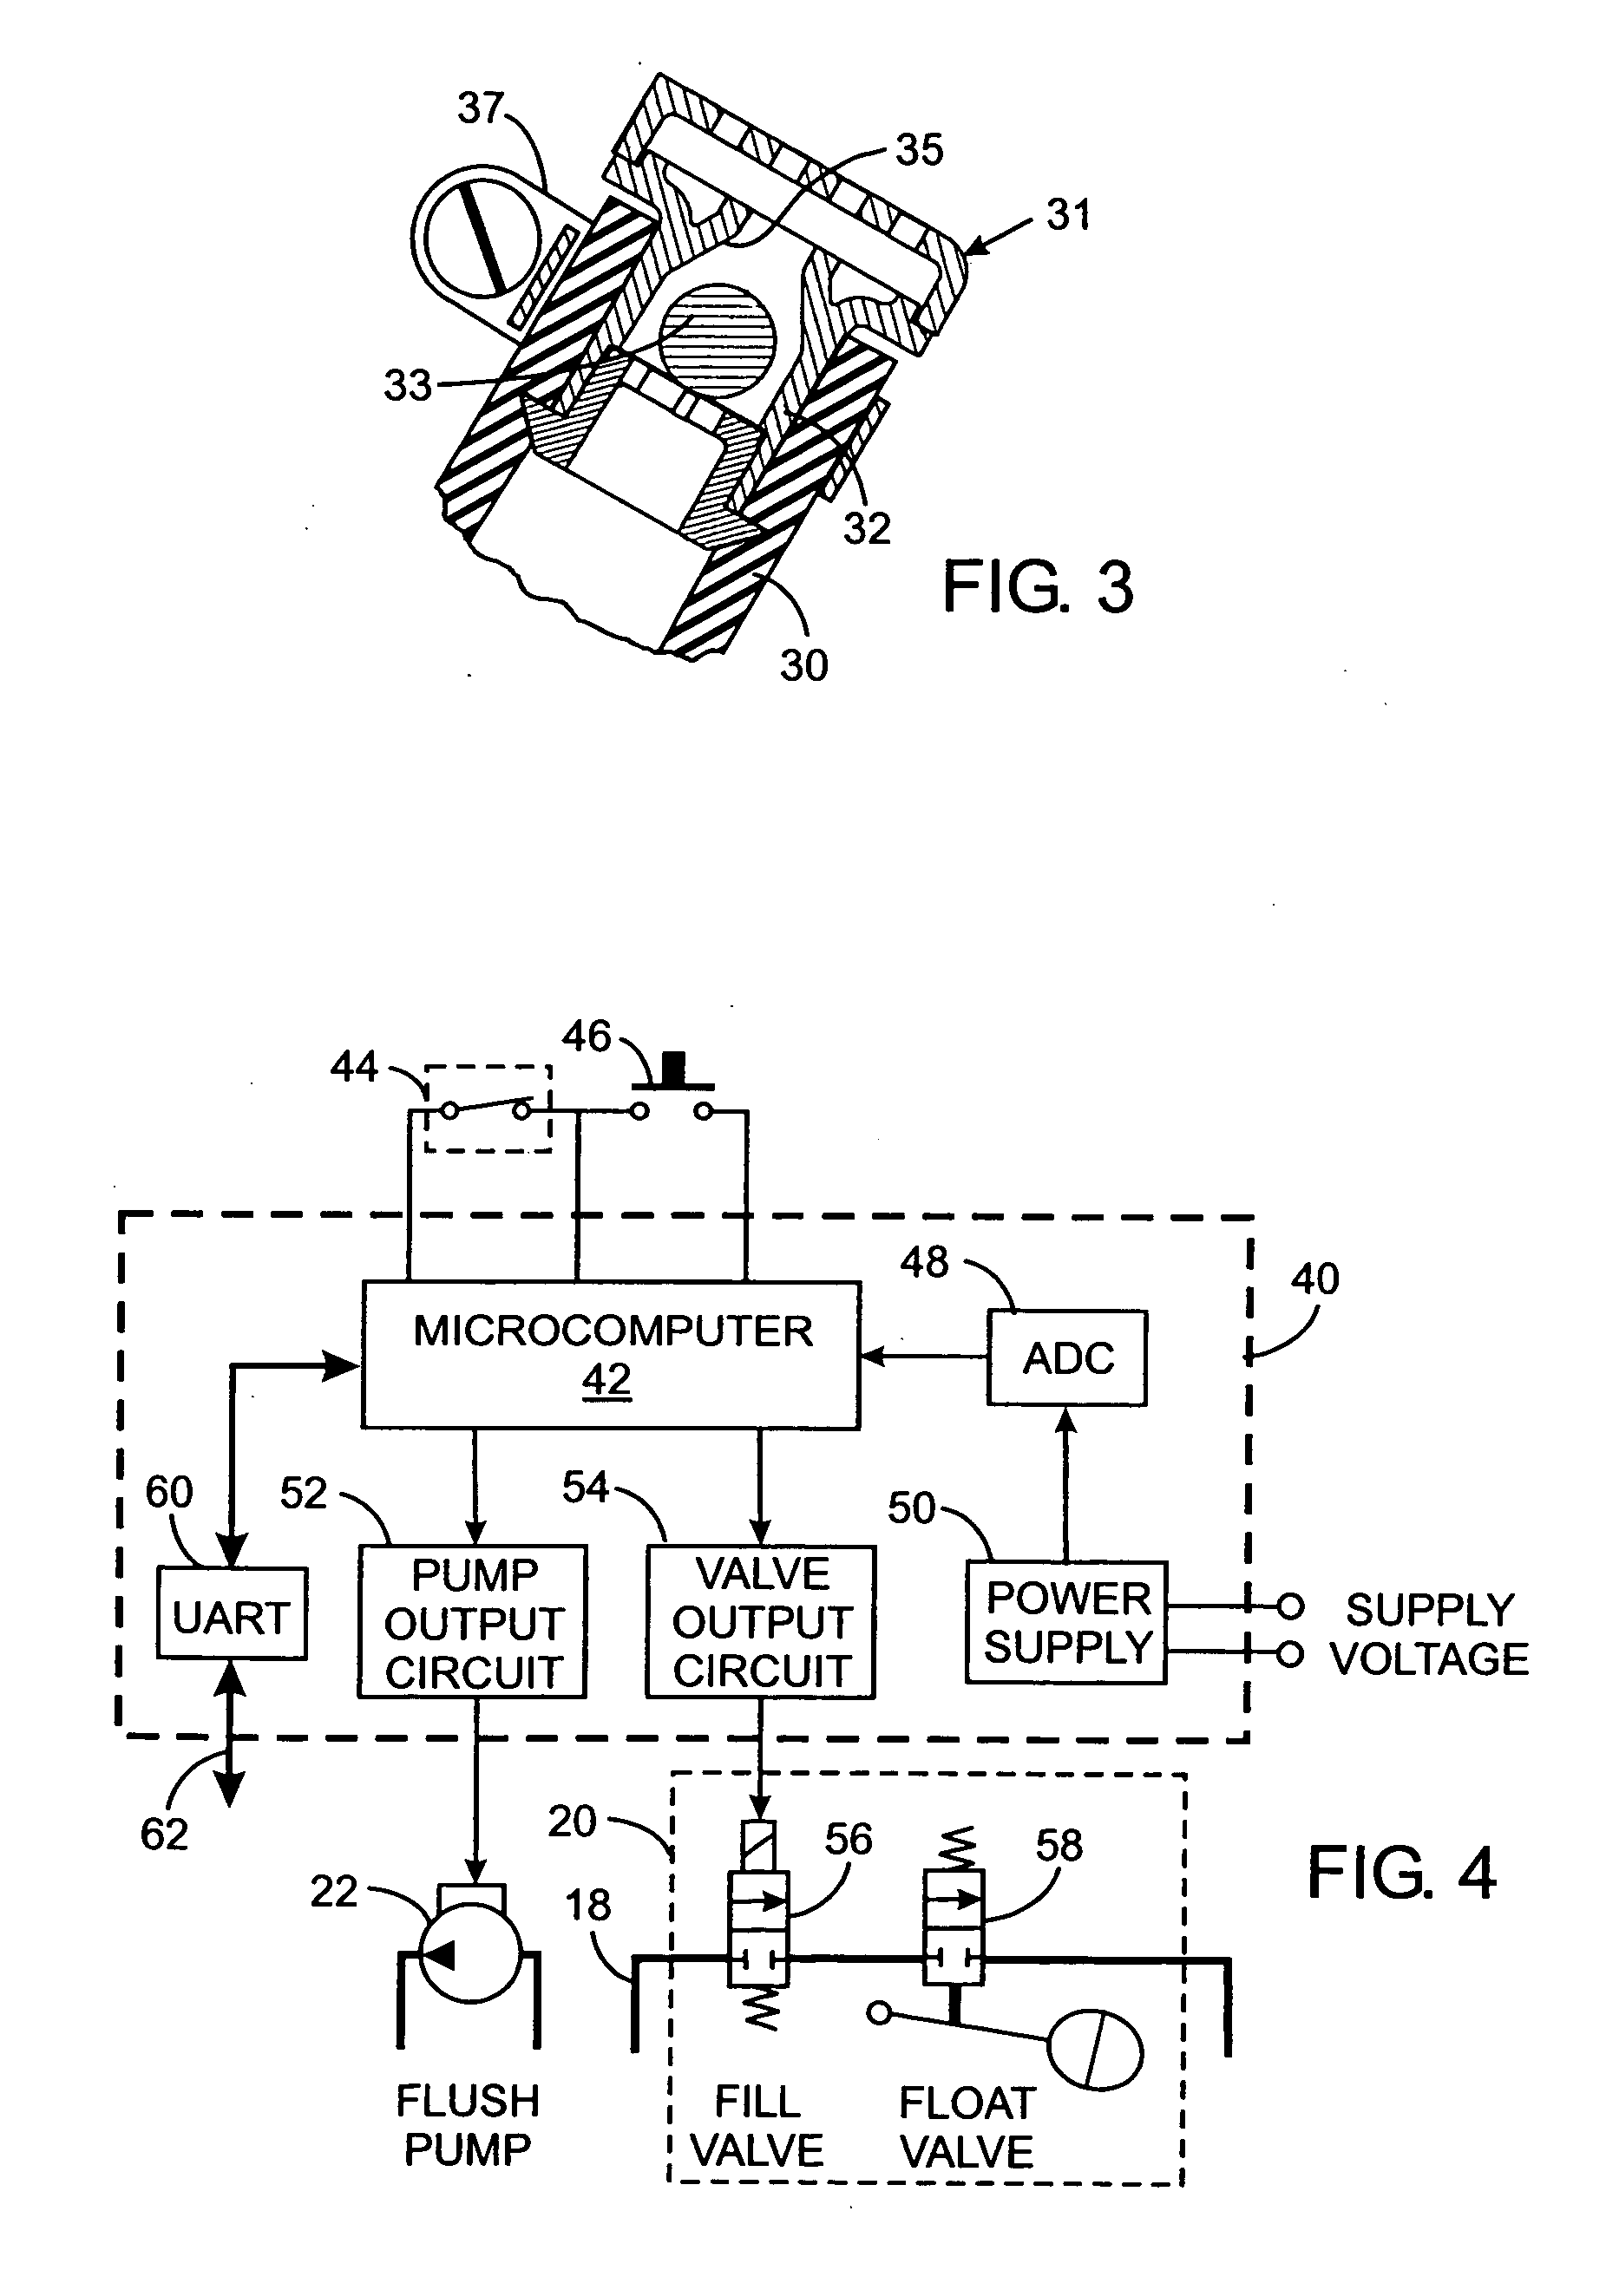 Control system for pump operated plumbing fixtures